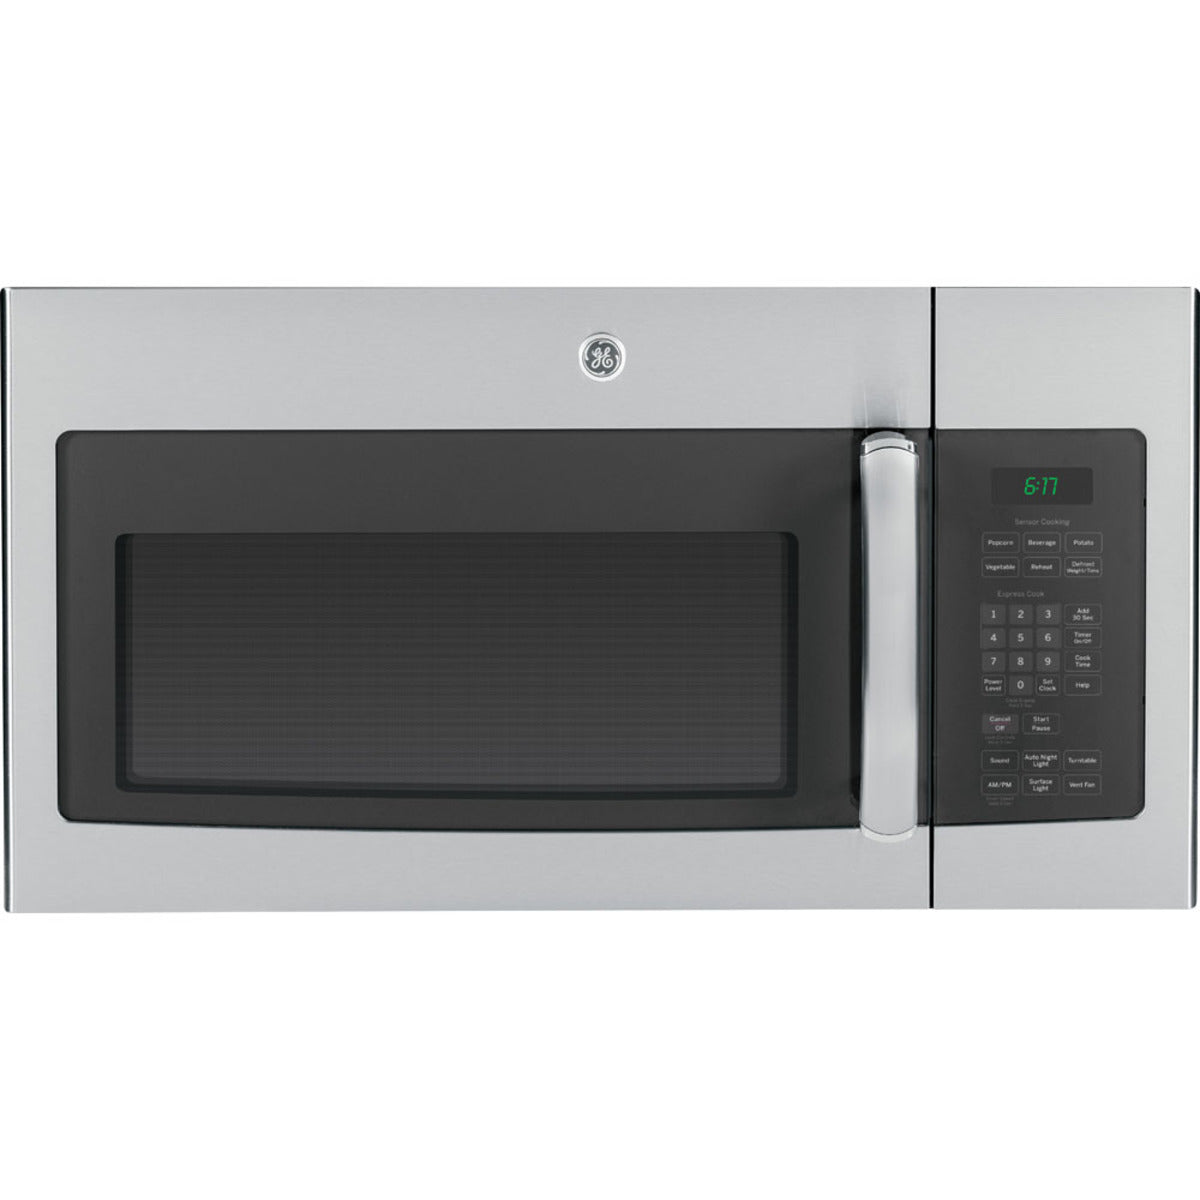 GE - 1.6 cu. Ft  Over the range Microwave in Stainless - JVM1635SFC